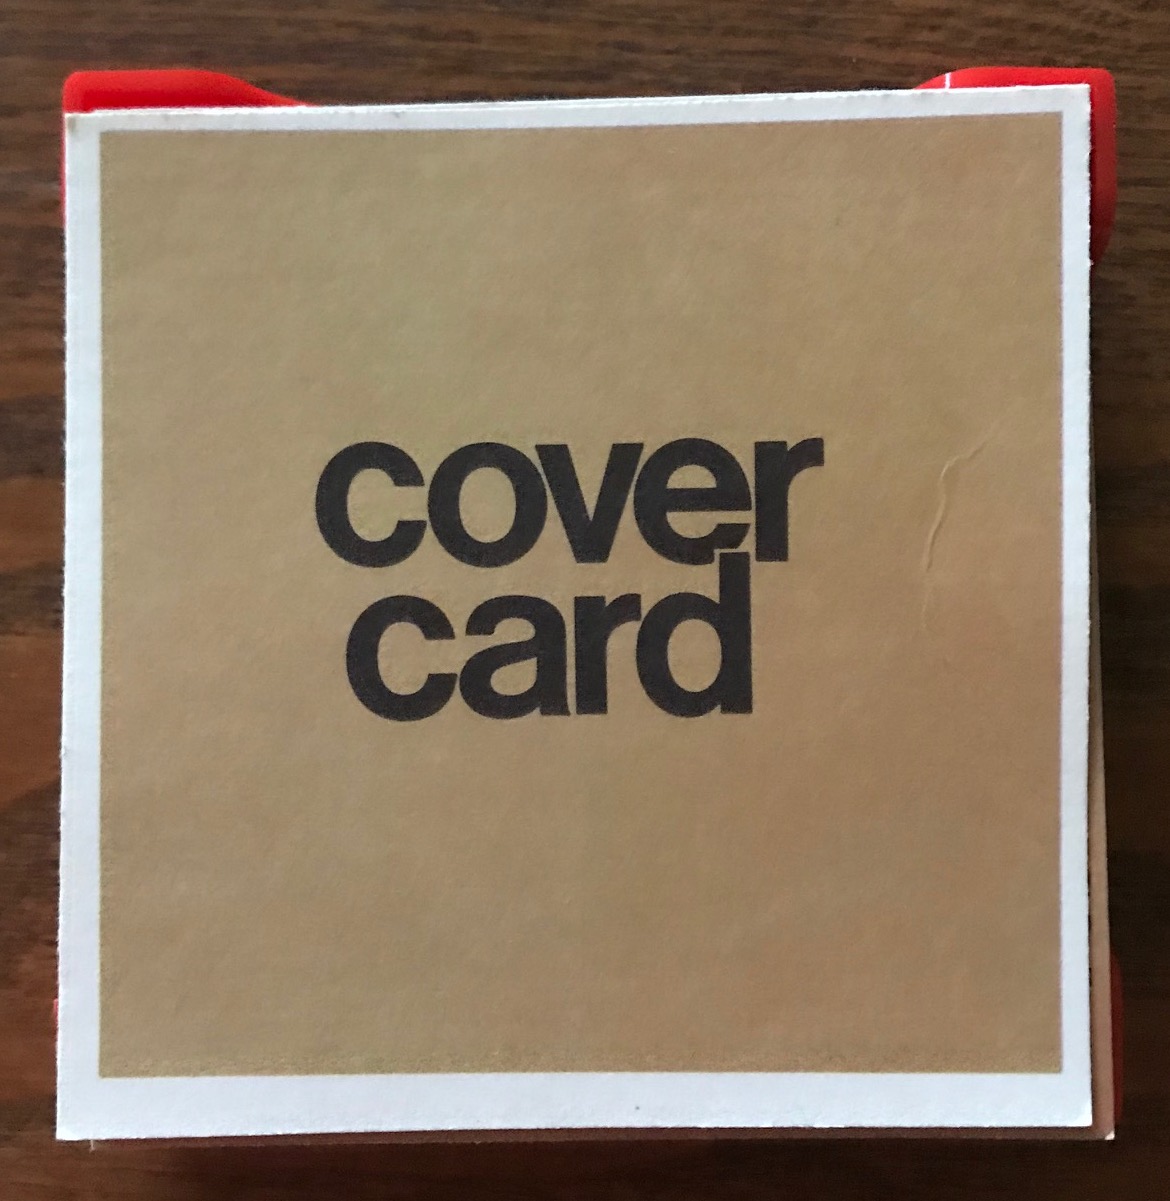 The tan card says Cover Card on top